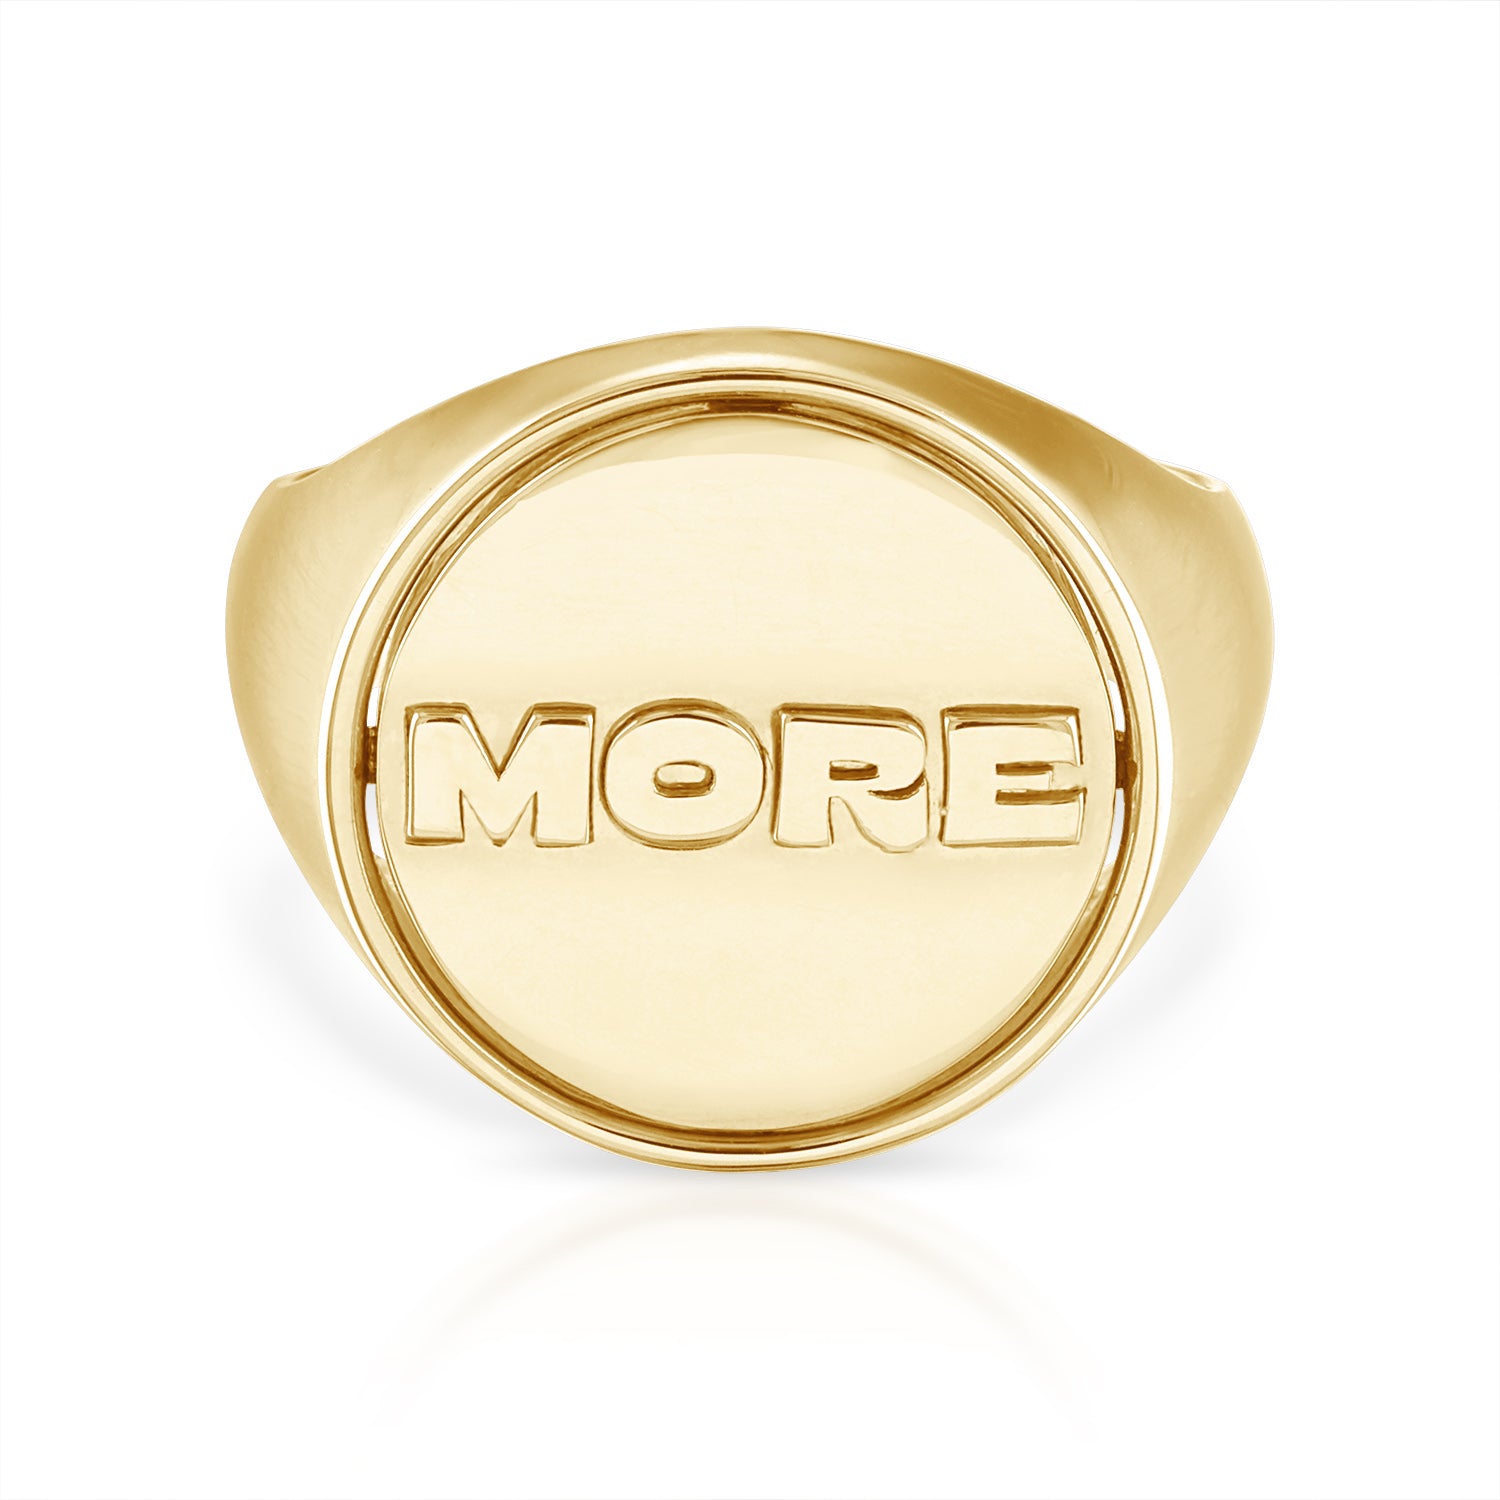 The More is More Flip Ring